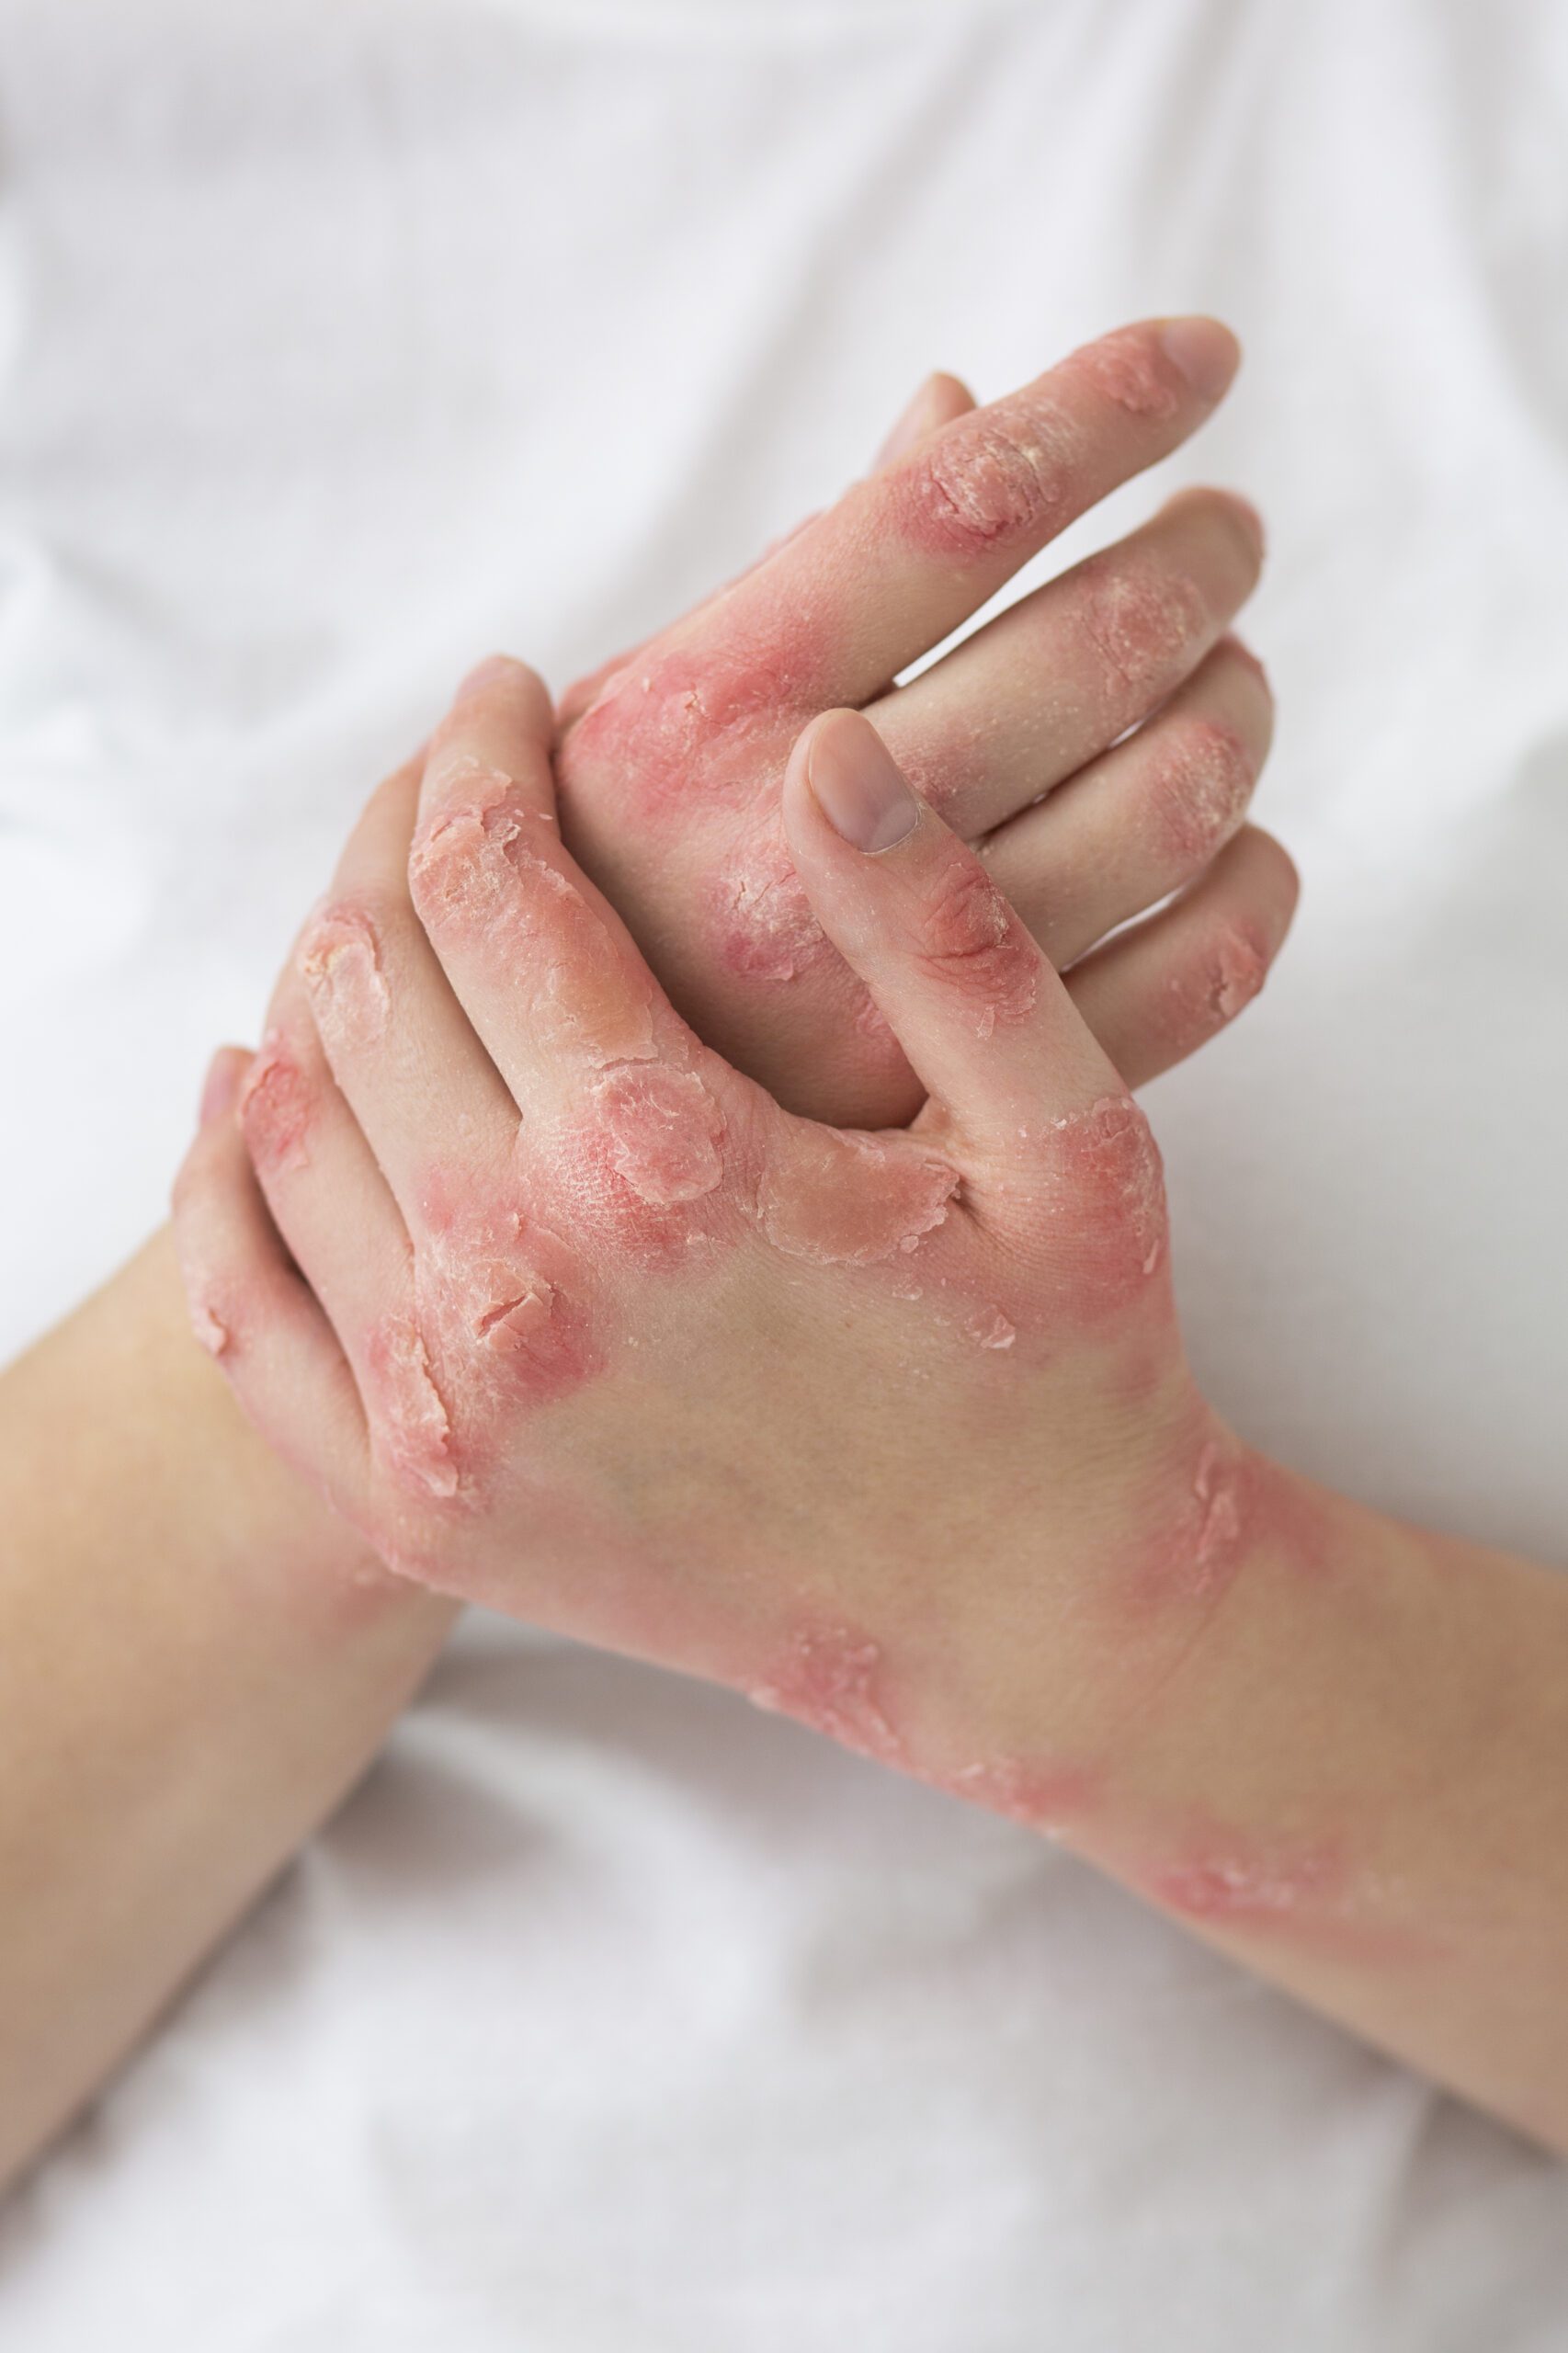 hands patient suffering from psoriasis scaled